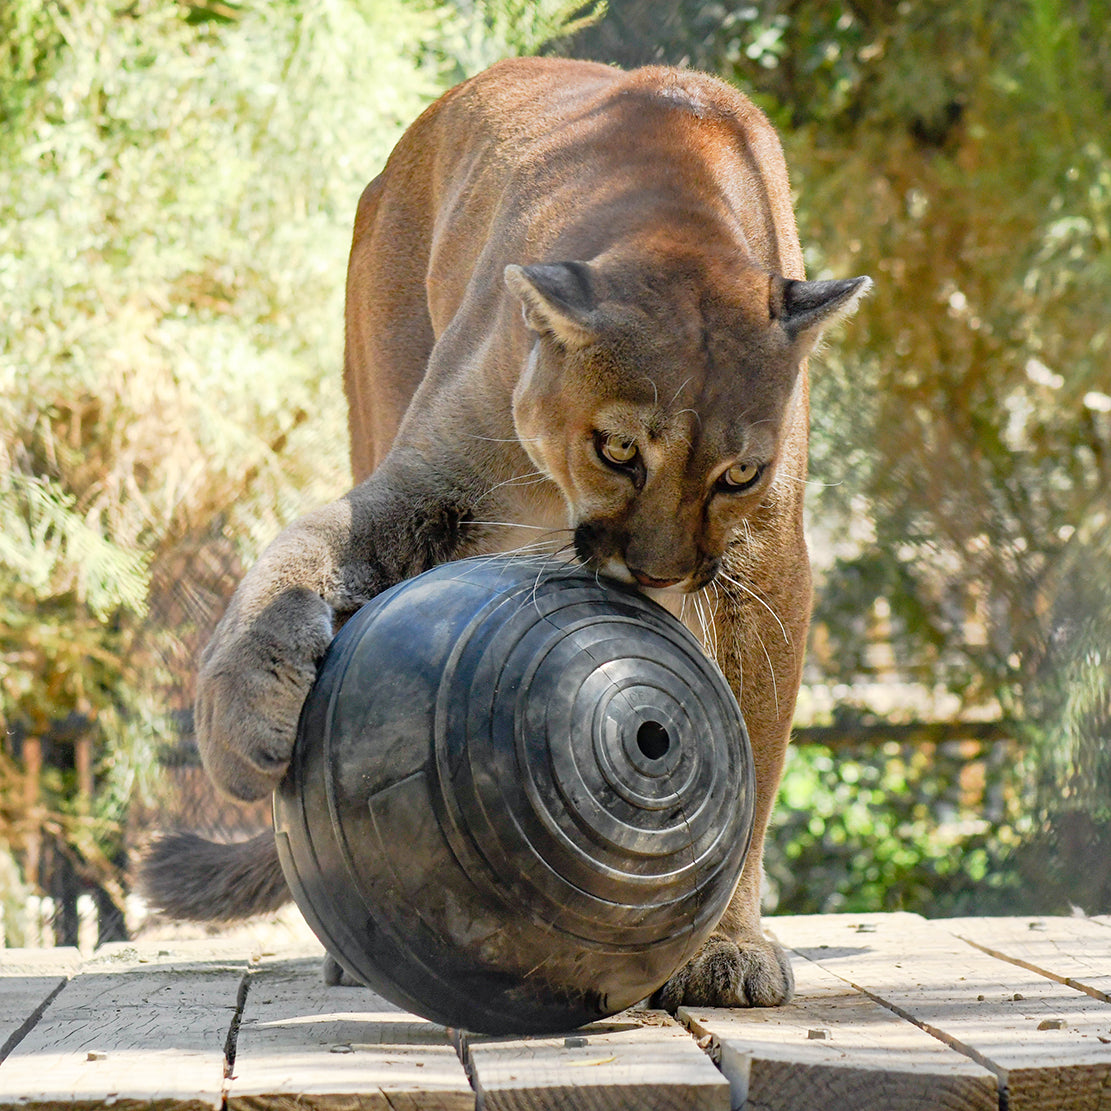 Mountain lion playing with solid ball